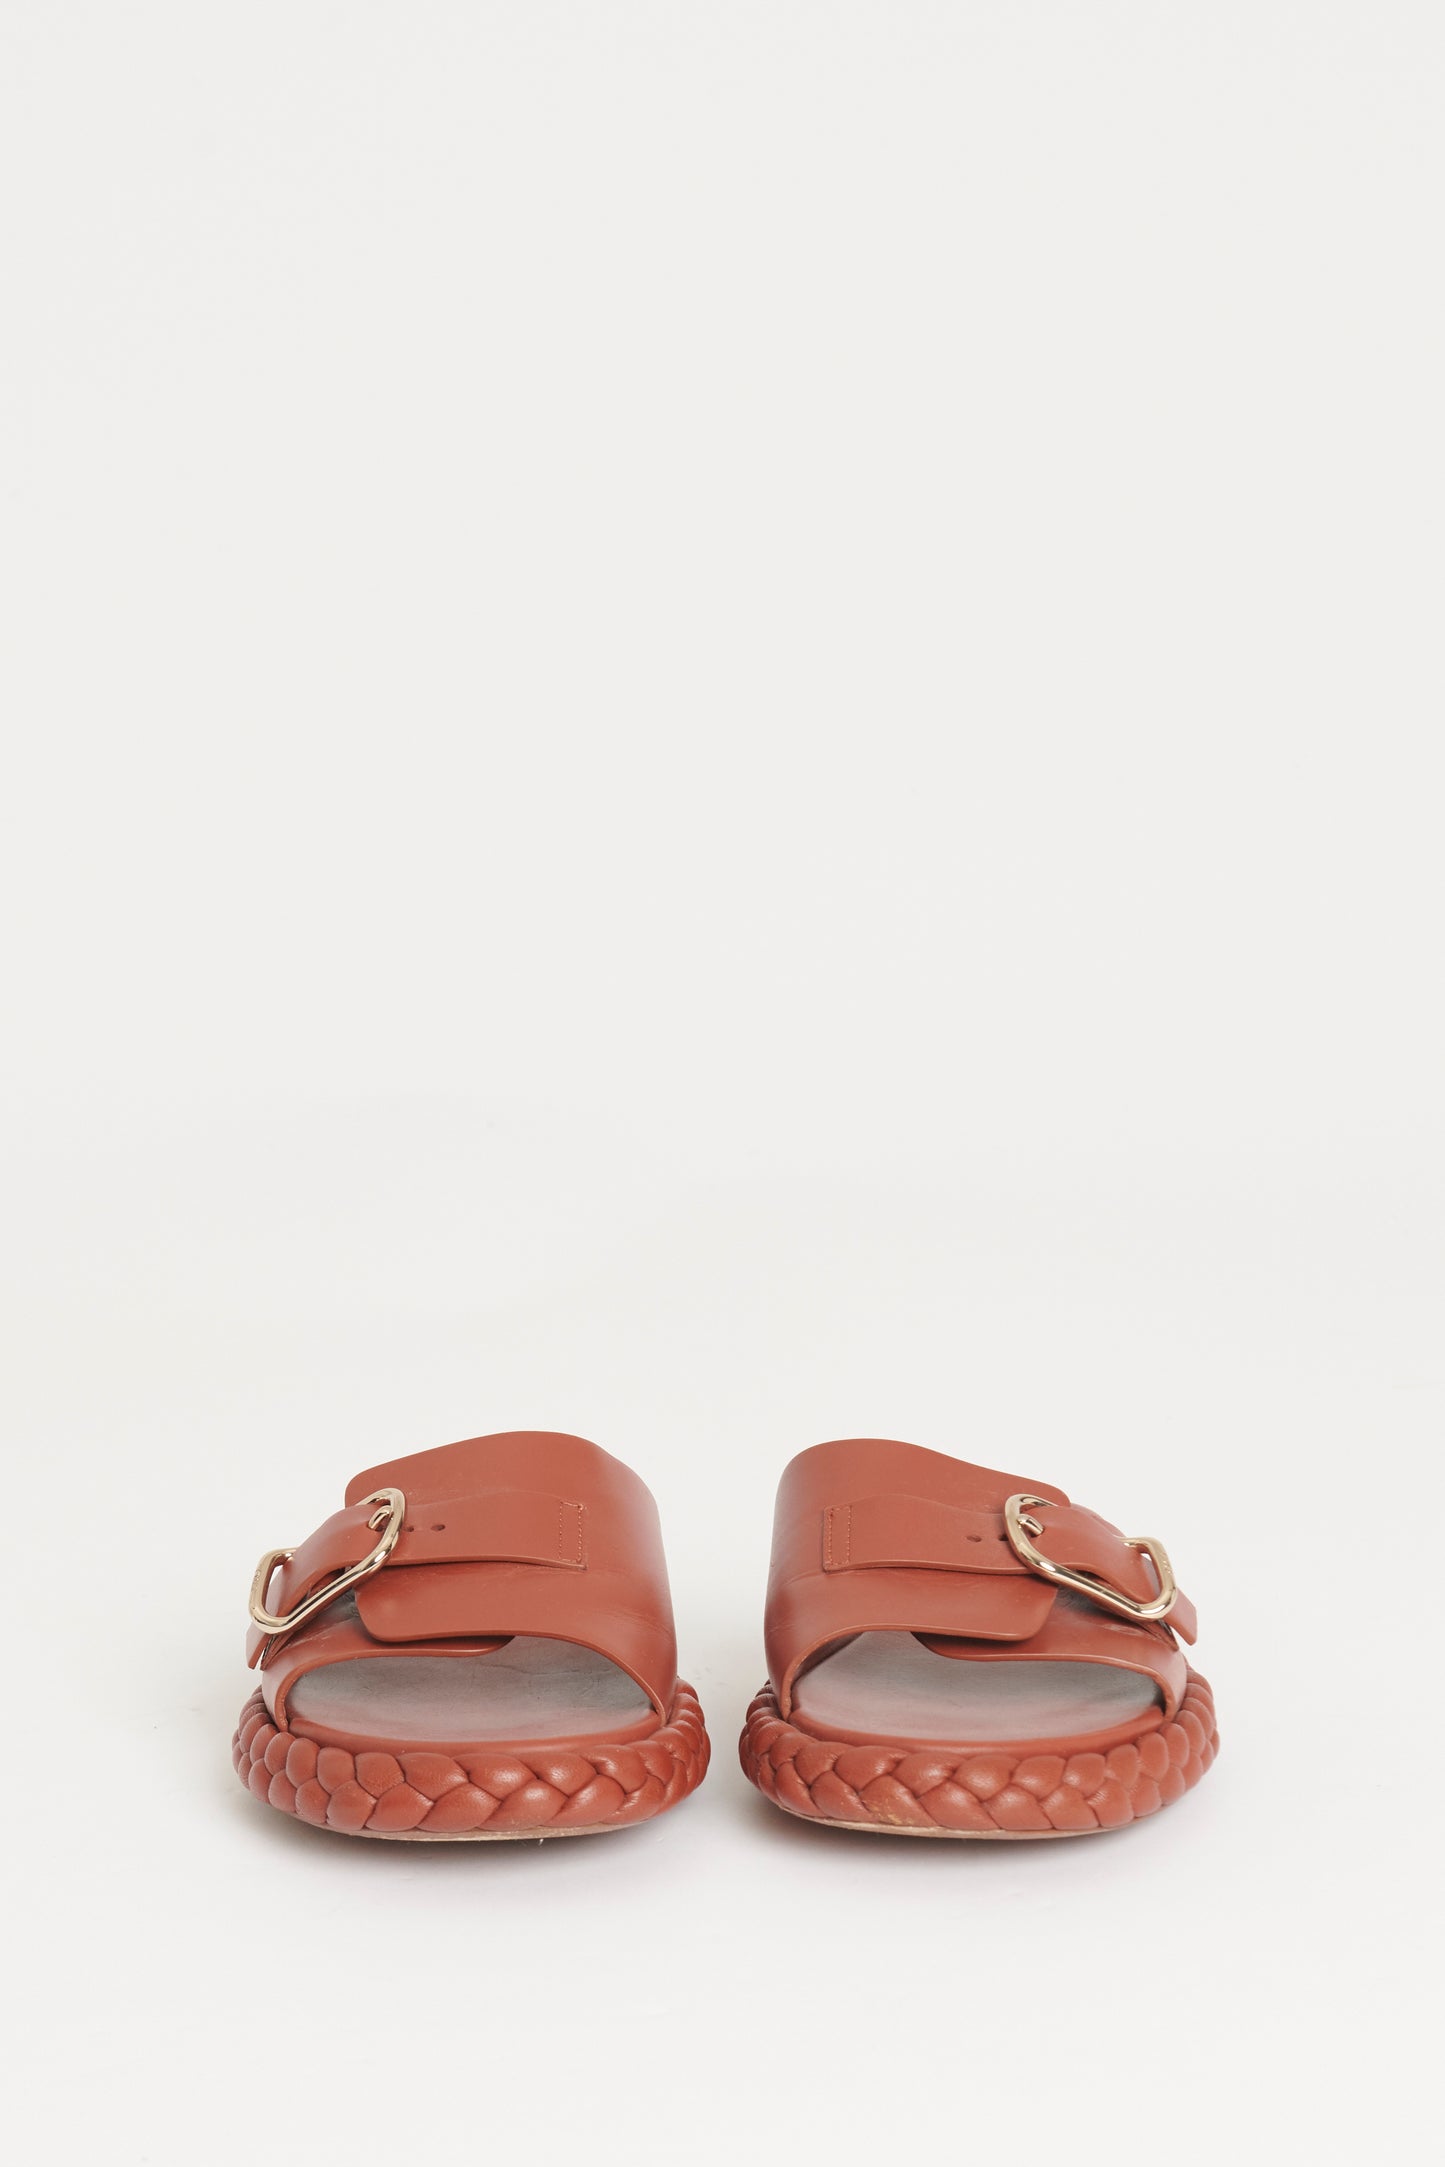 Brown Leather Preowned Braided Pip Sandals